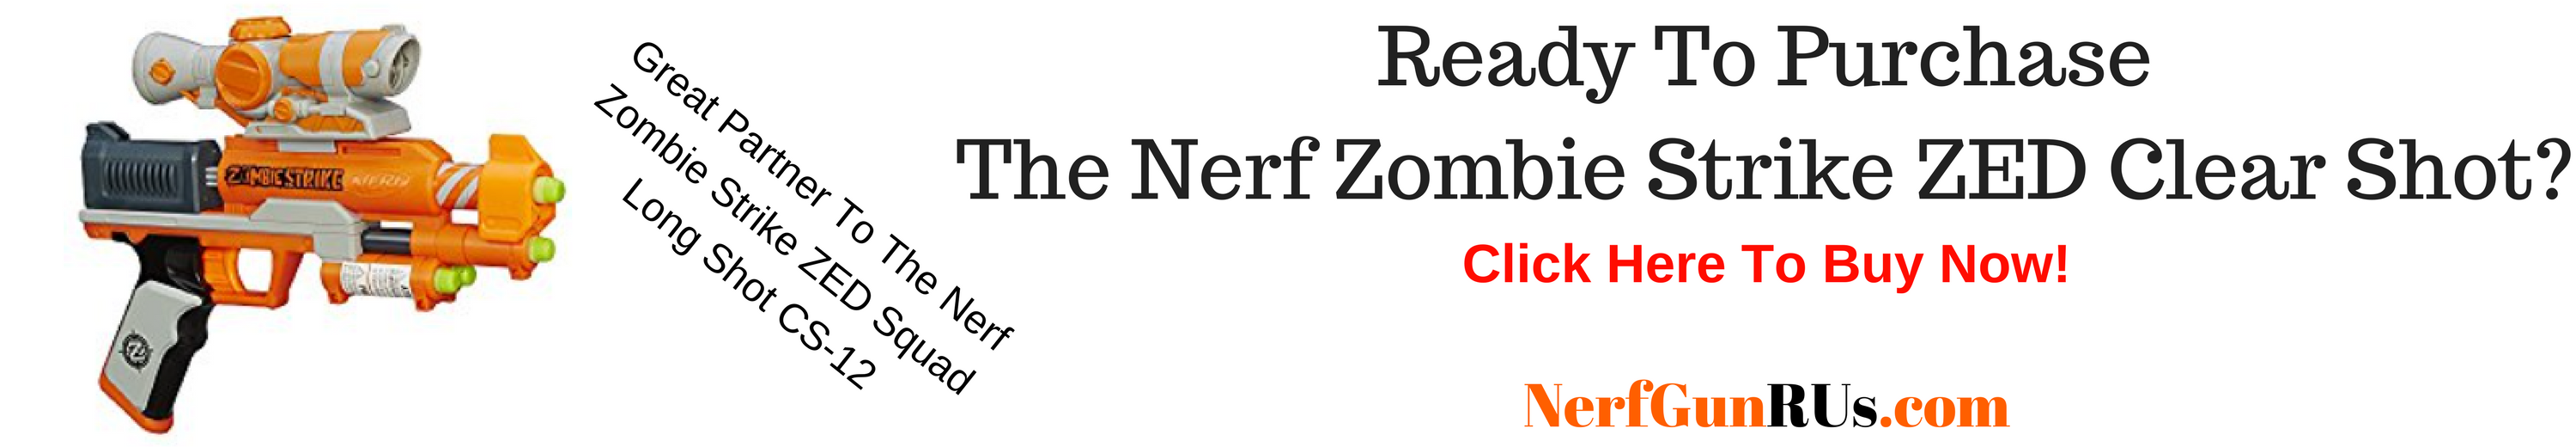 Ready To Purchase The Nerf Zombie Strike ZED Clear Shot | NerfGunRUs.com